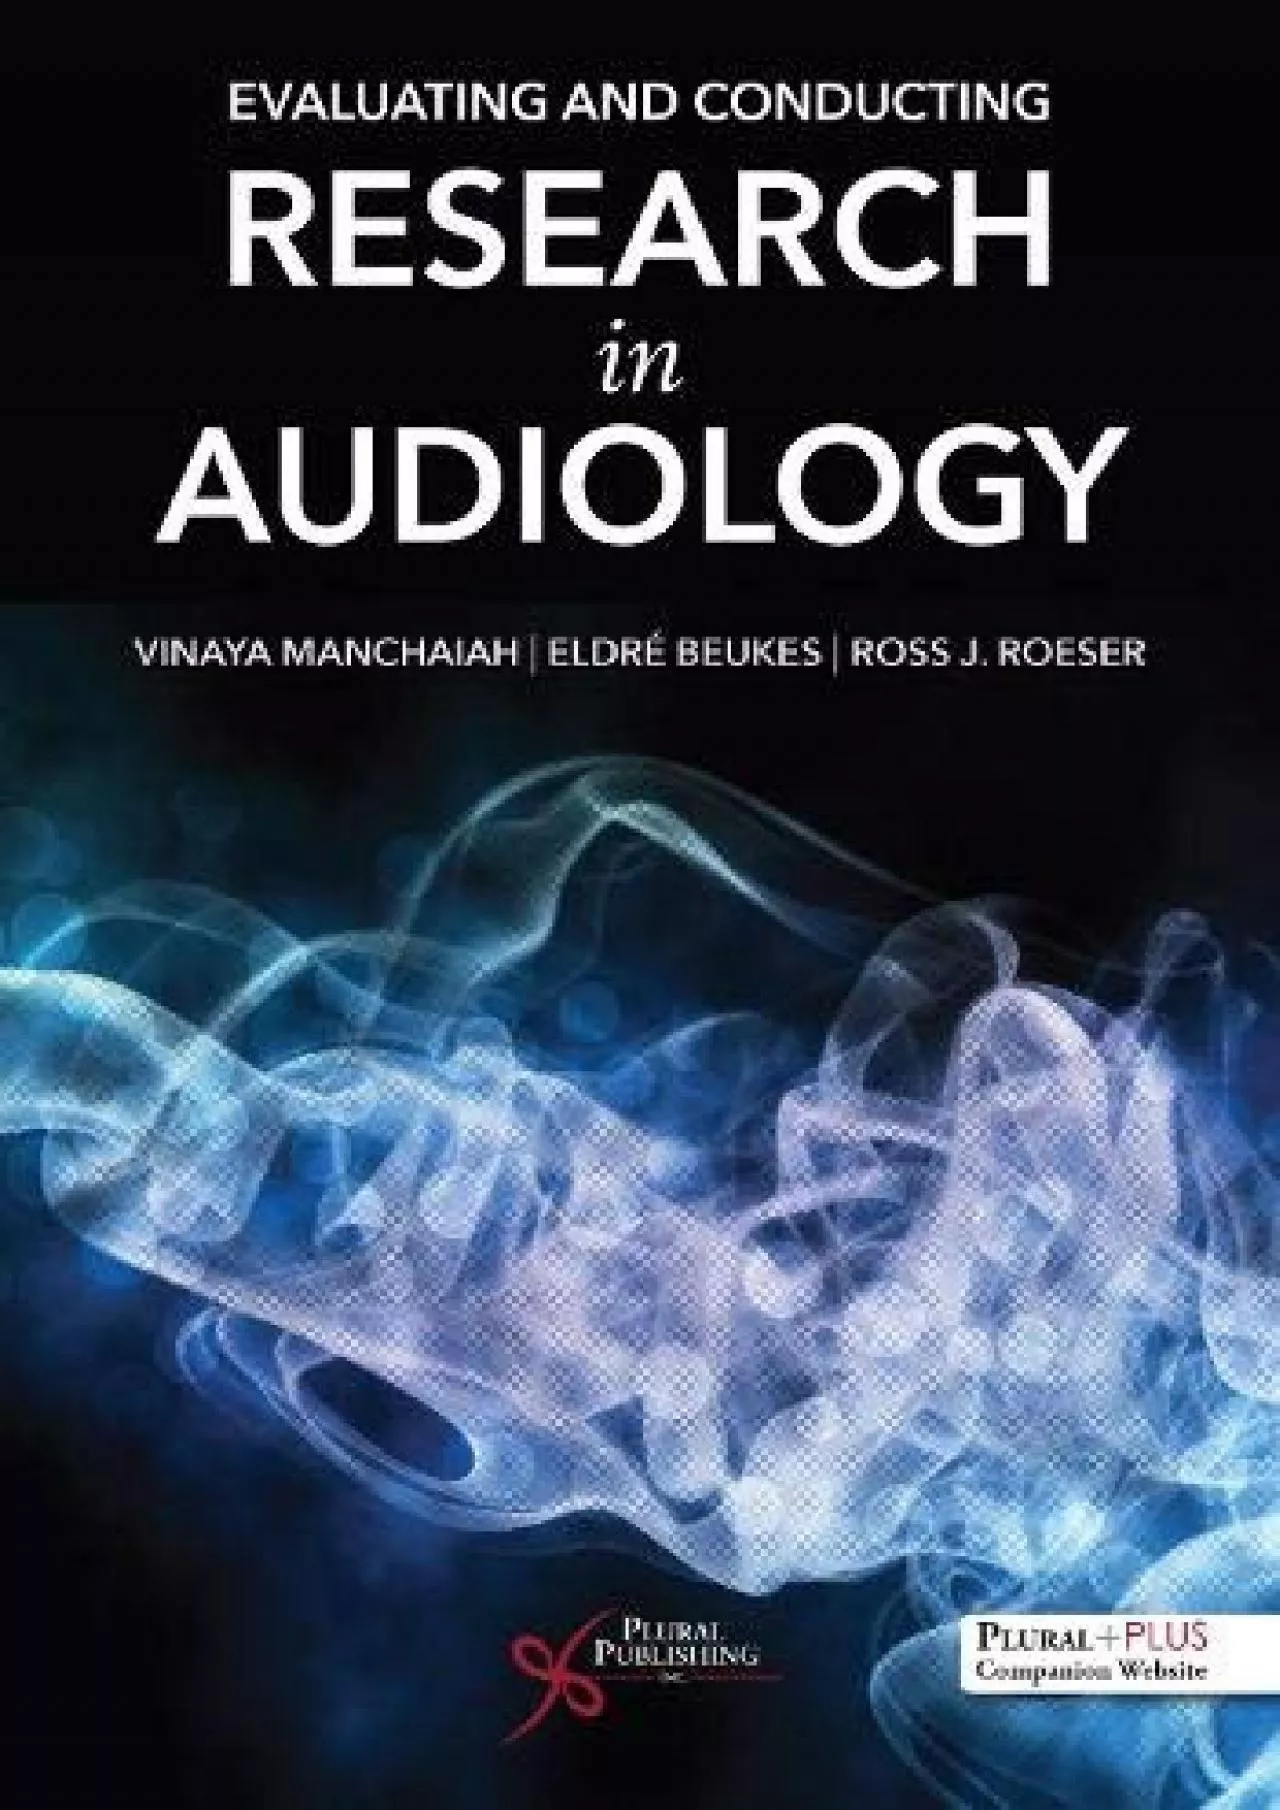 (BOOK)-Evaluating and Conducting Research in Audiology